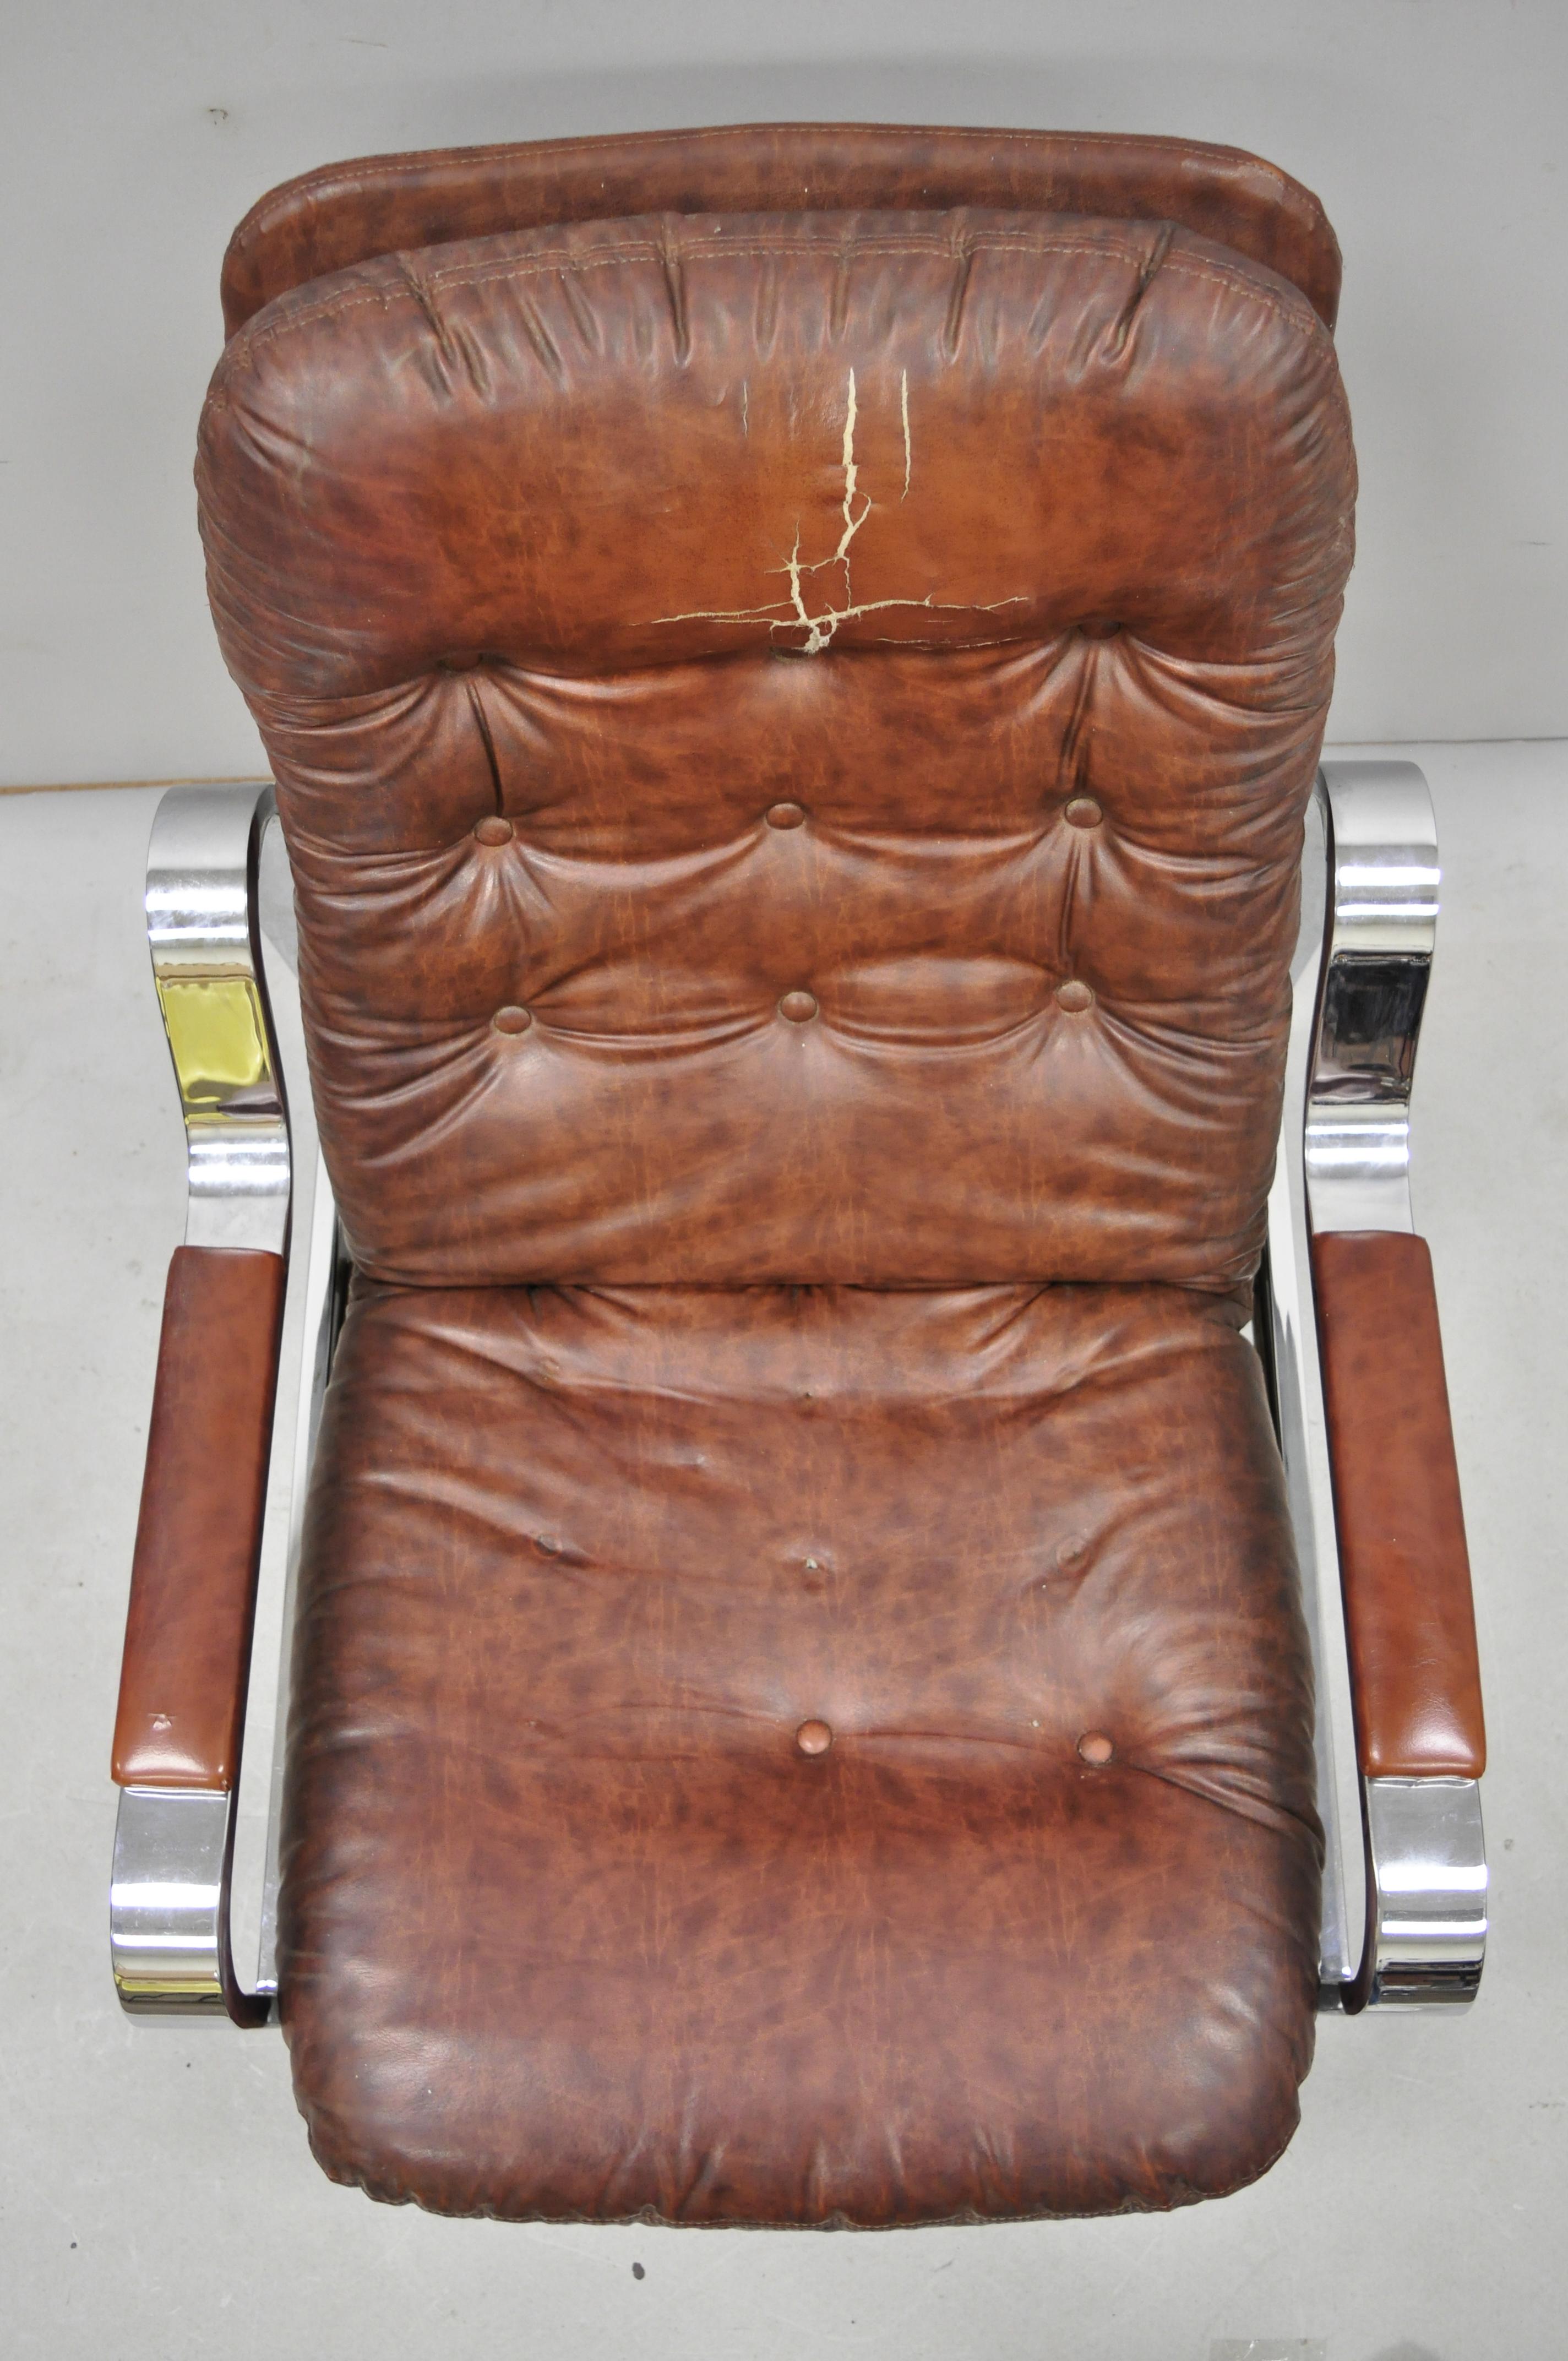 Midcentury Italian Modern Selig Chrome Reclining Recliner Lounge Chair In Good Condition For Sale In Philadelphia, PA